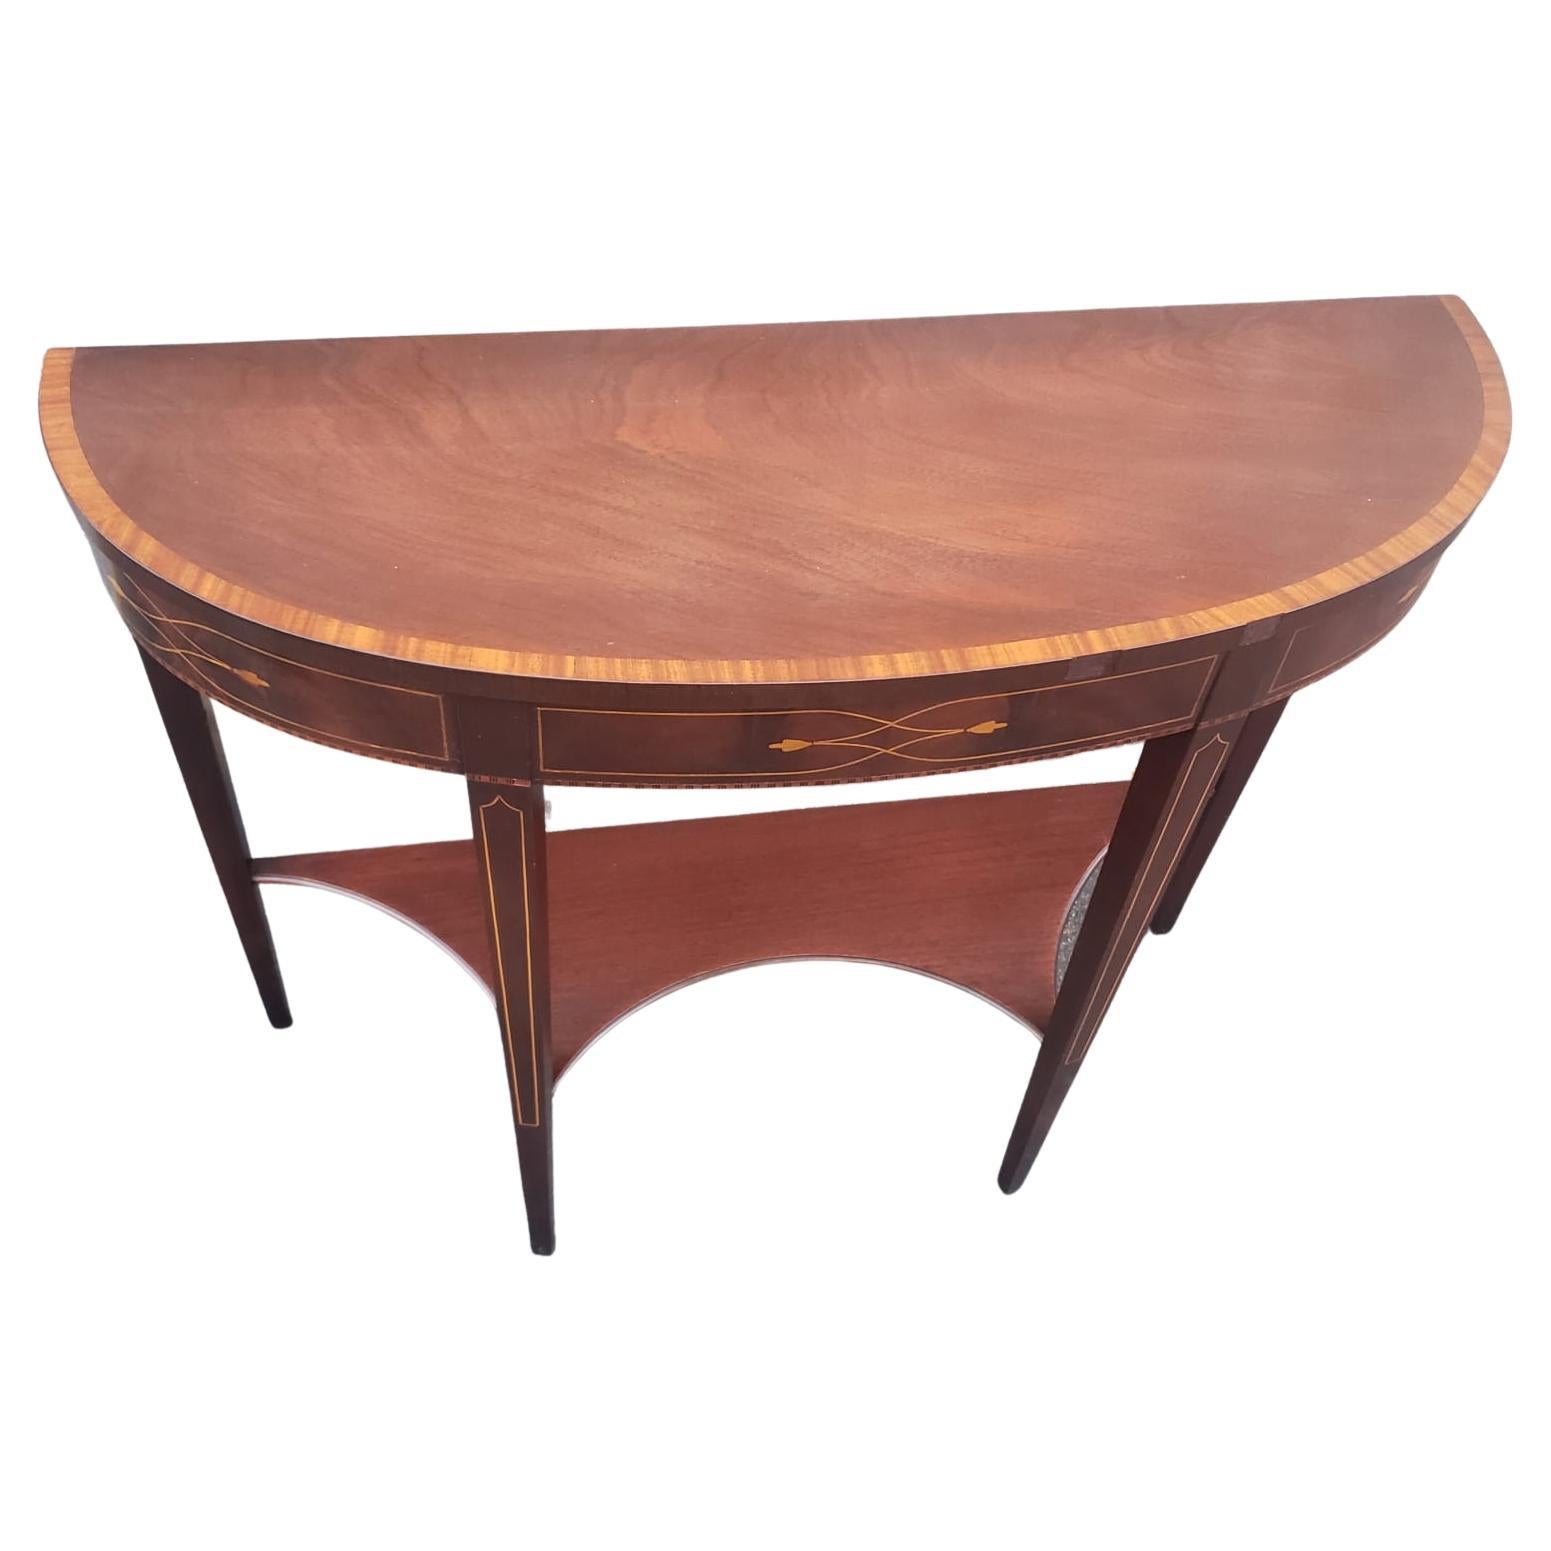 A 1930s Weiman Furniture Heirloom Quality Federal Two-Tier Mahogany and Satinwood Inlaid Demilune Console Table in good vintage condition. Measures 38